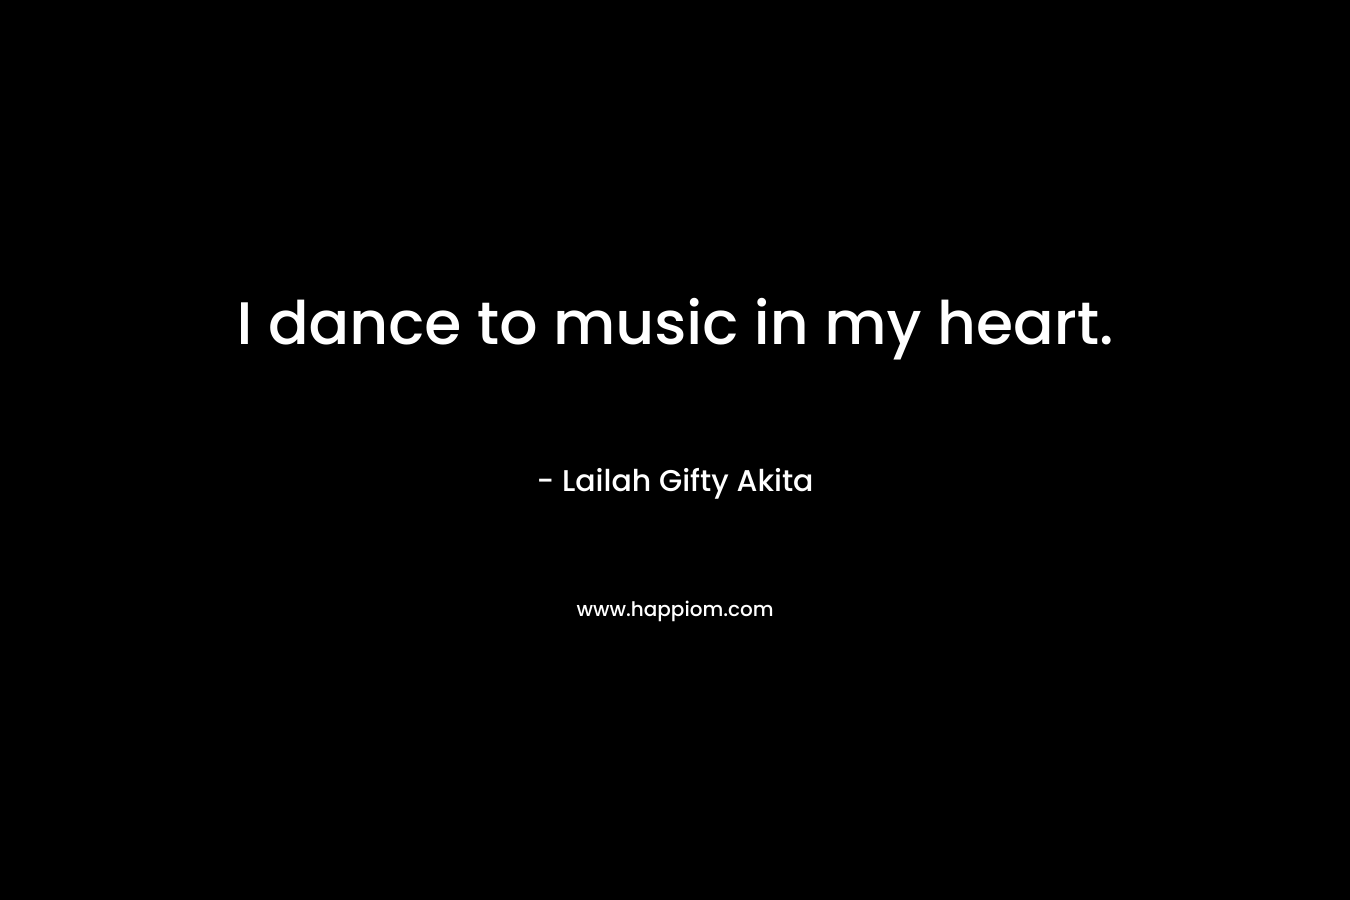 I dance to music in my heart.